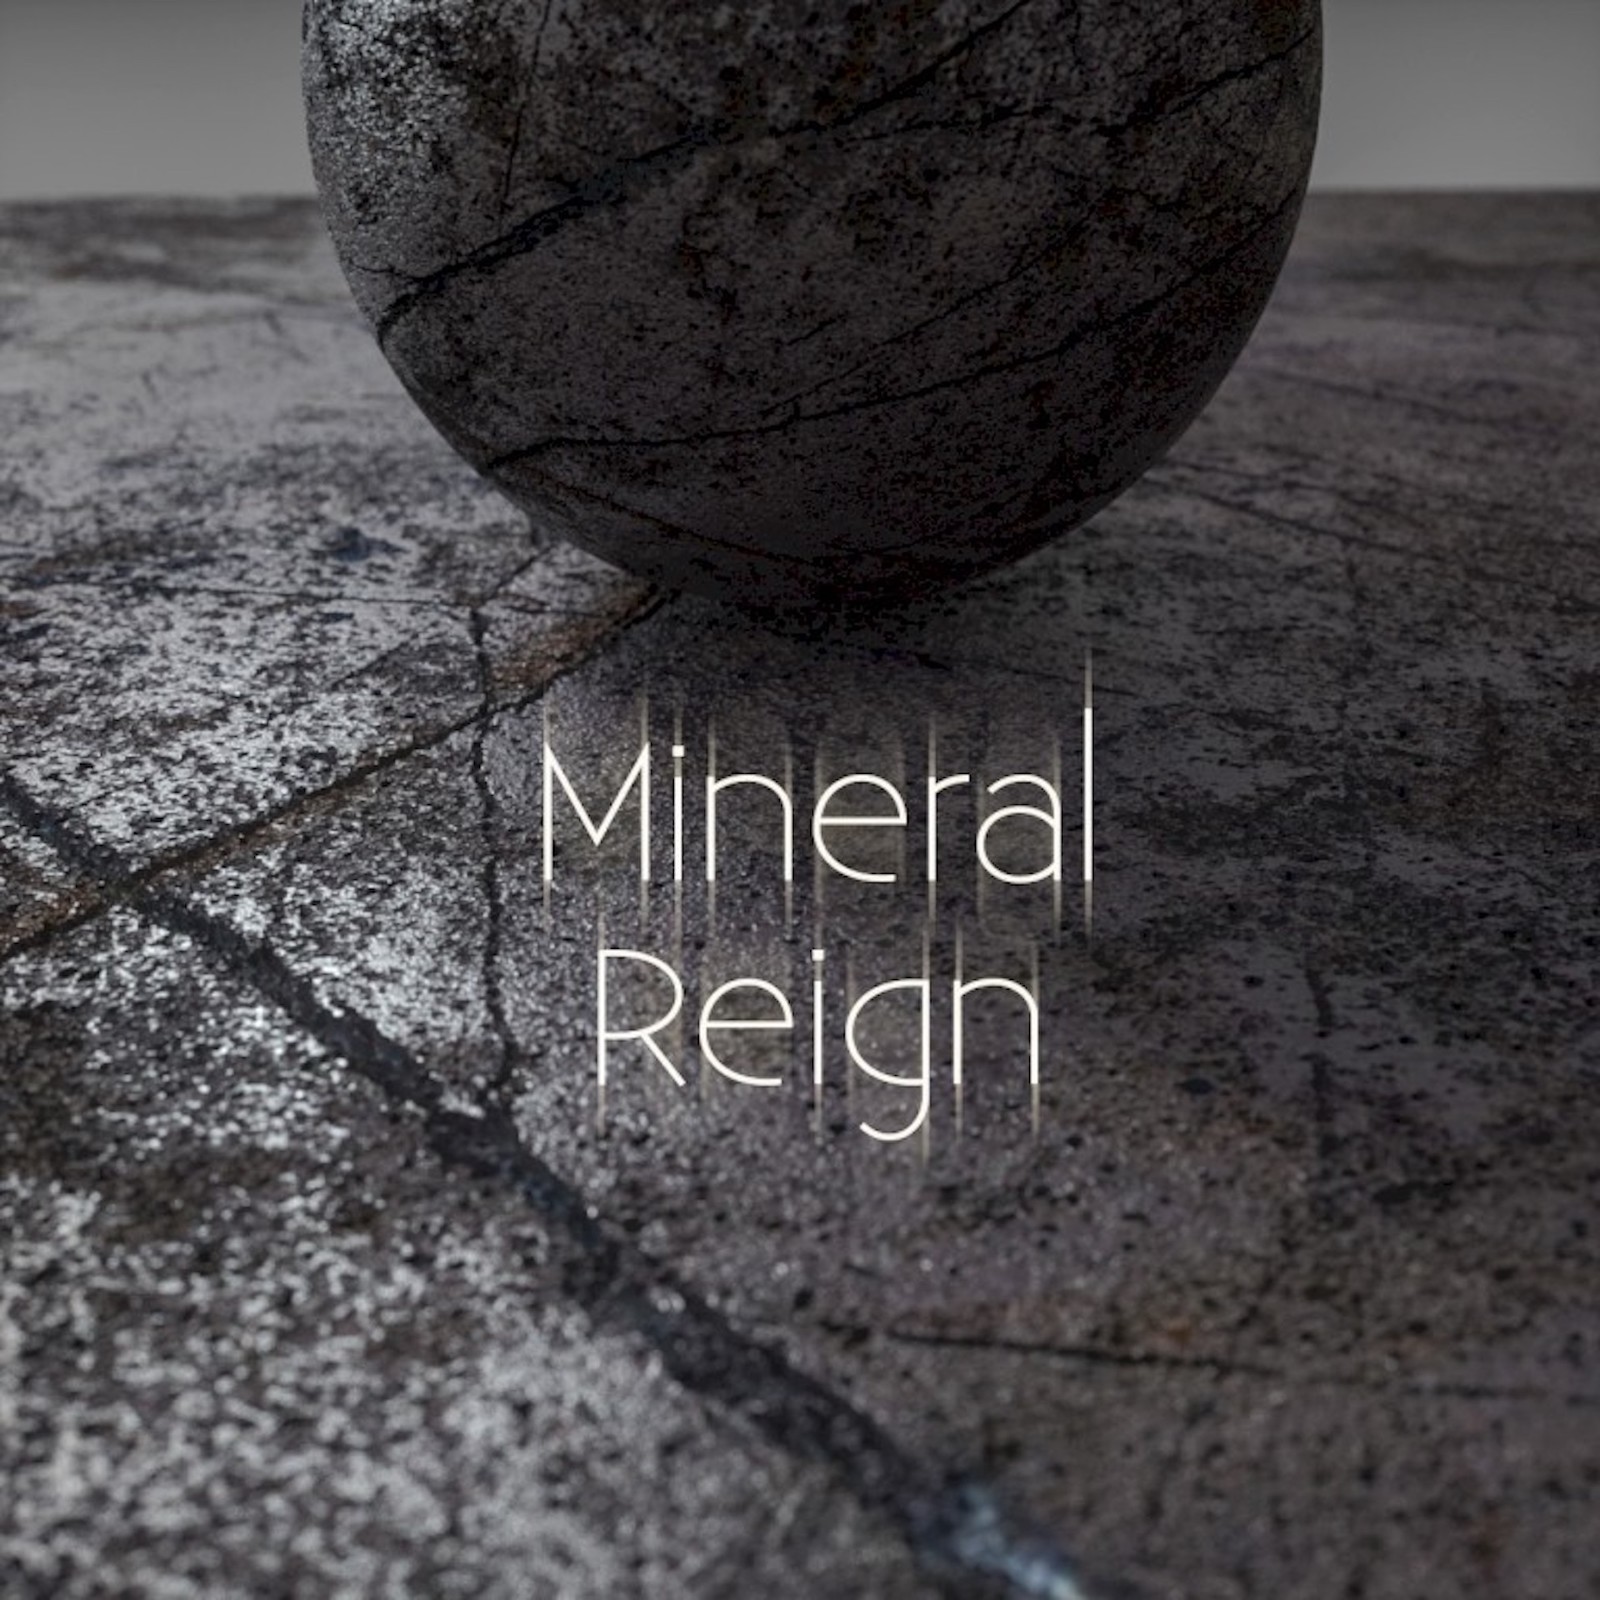 Mineral reign (coupon inside)